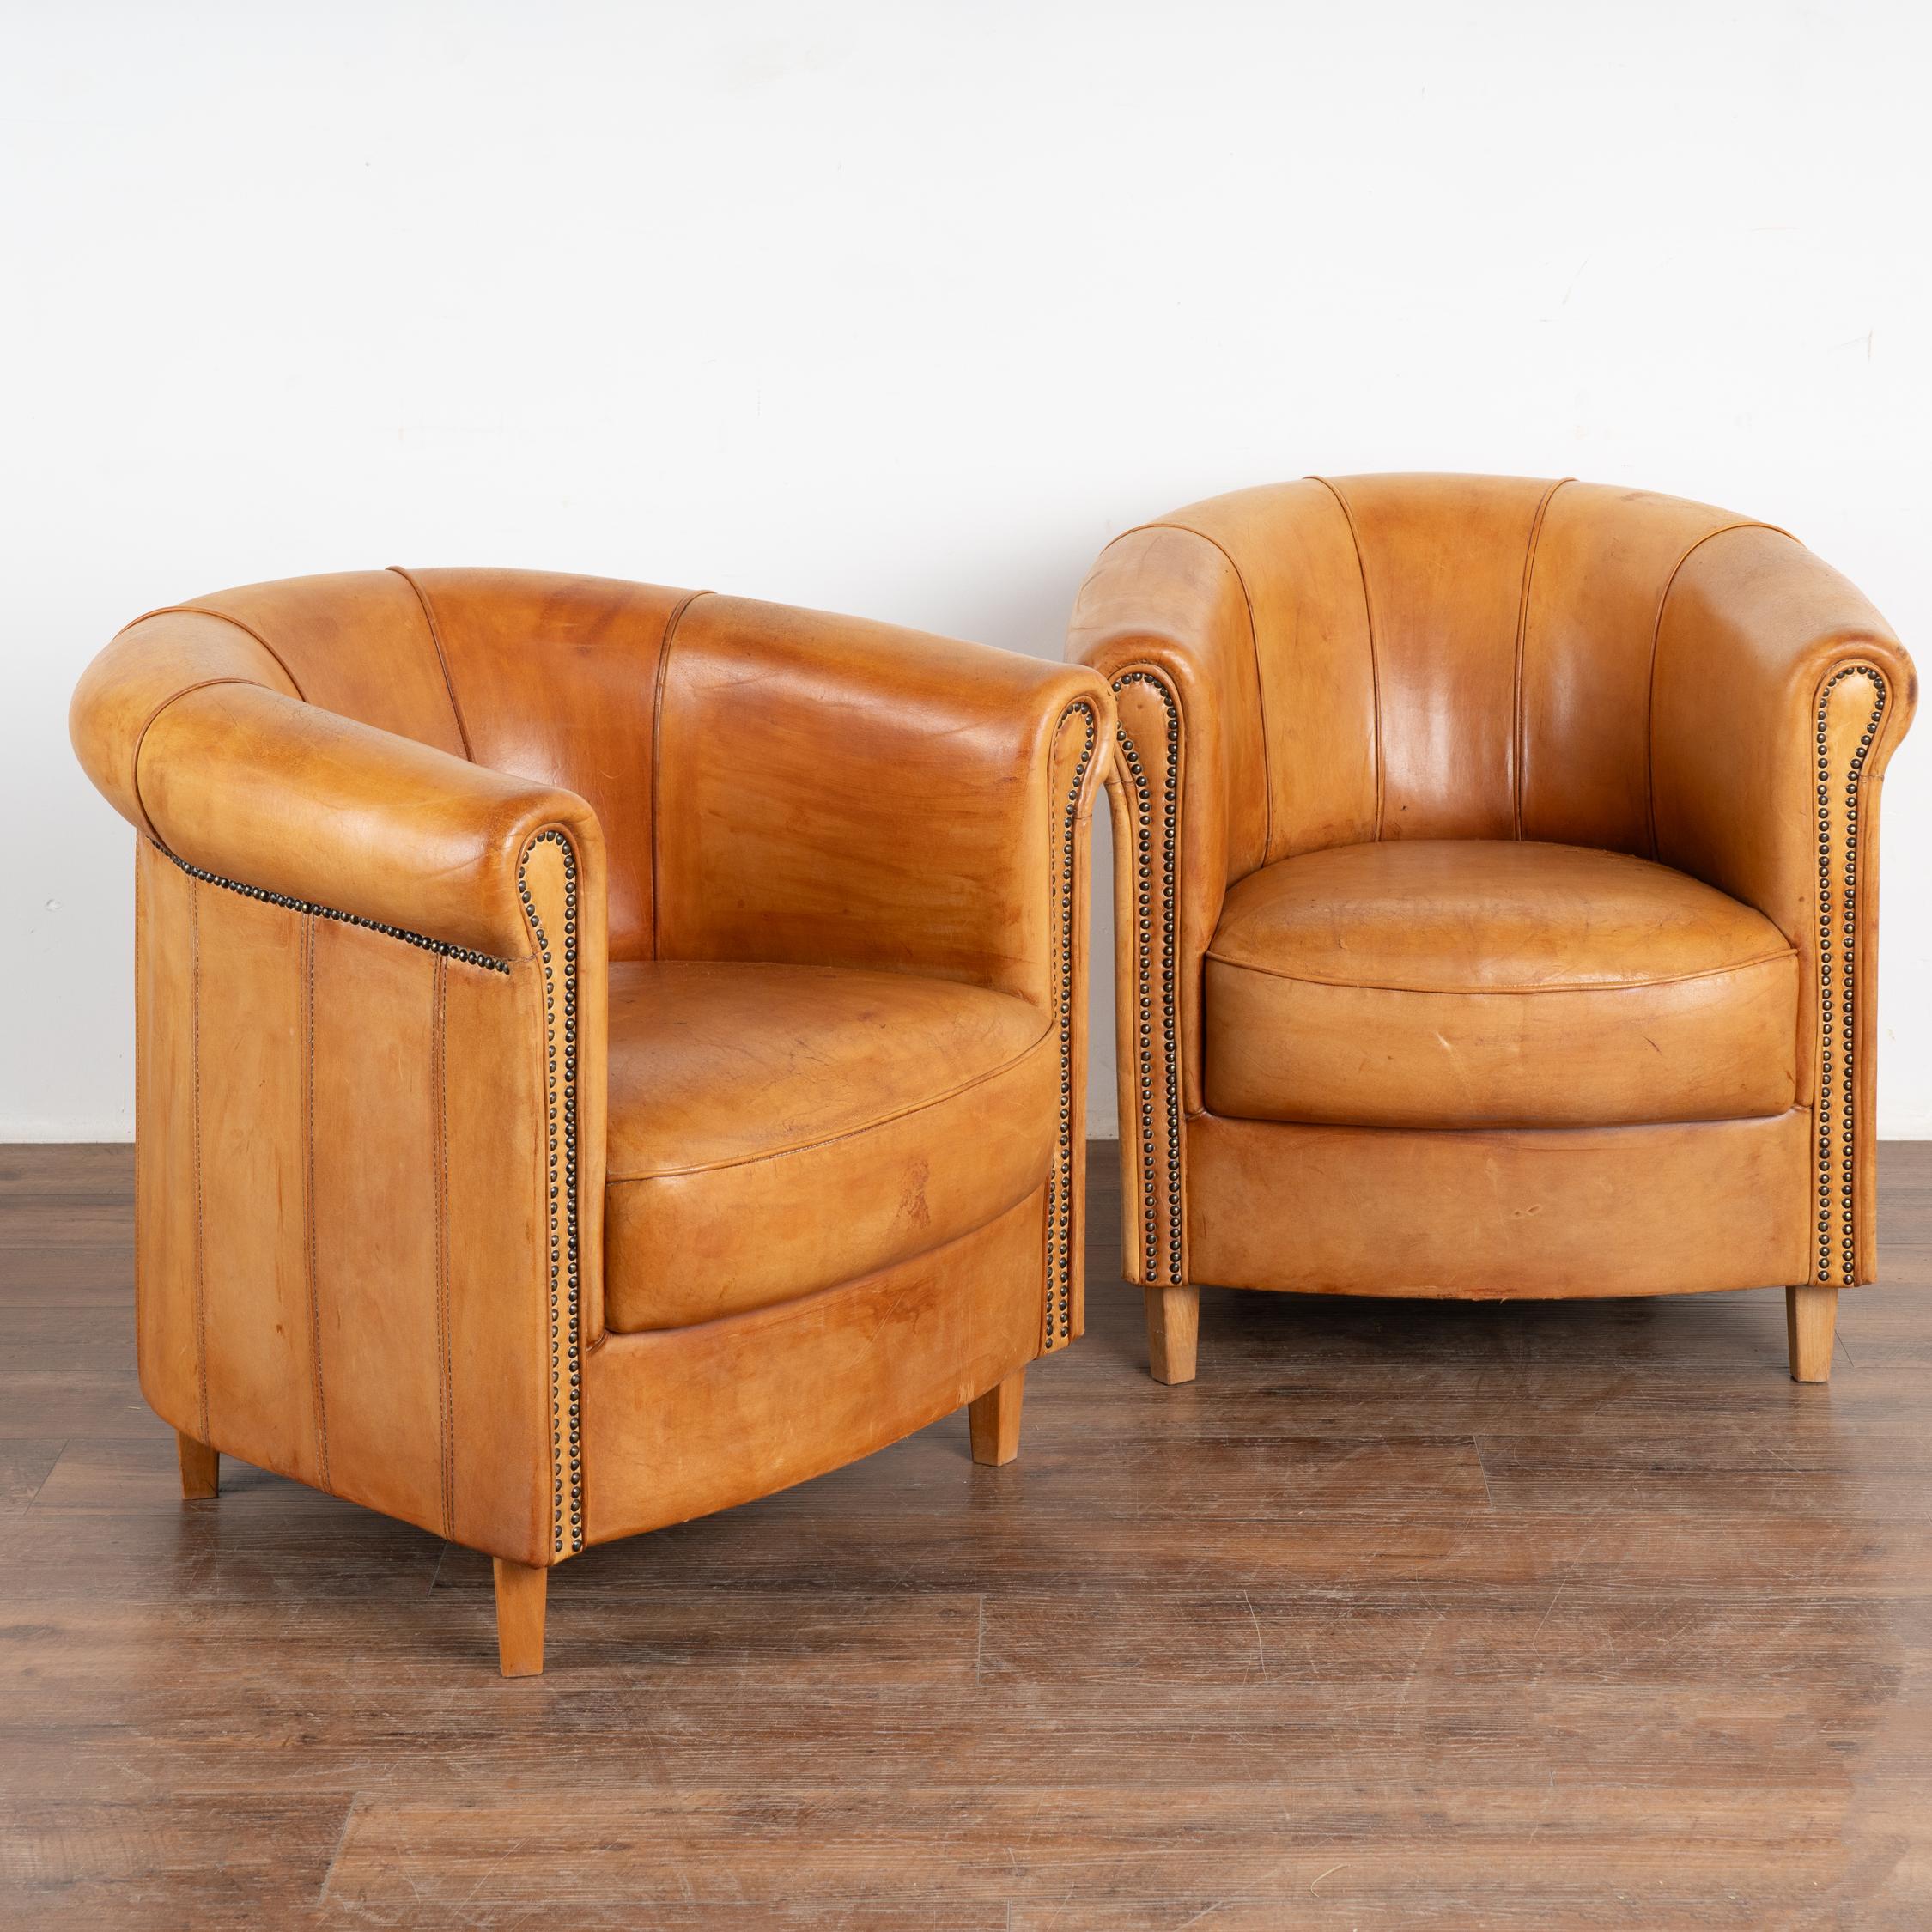 Pair, art deco style club chair by Joris of the Netherlands in camel tone leather. Plaque on back noting 